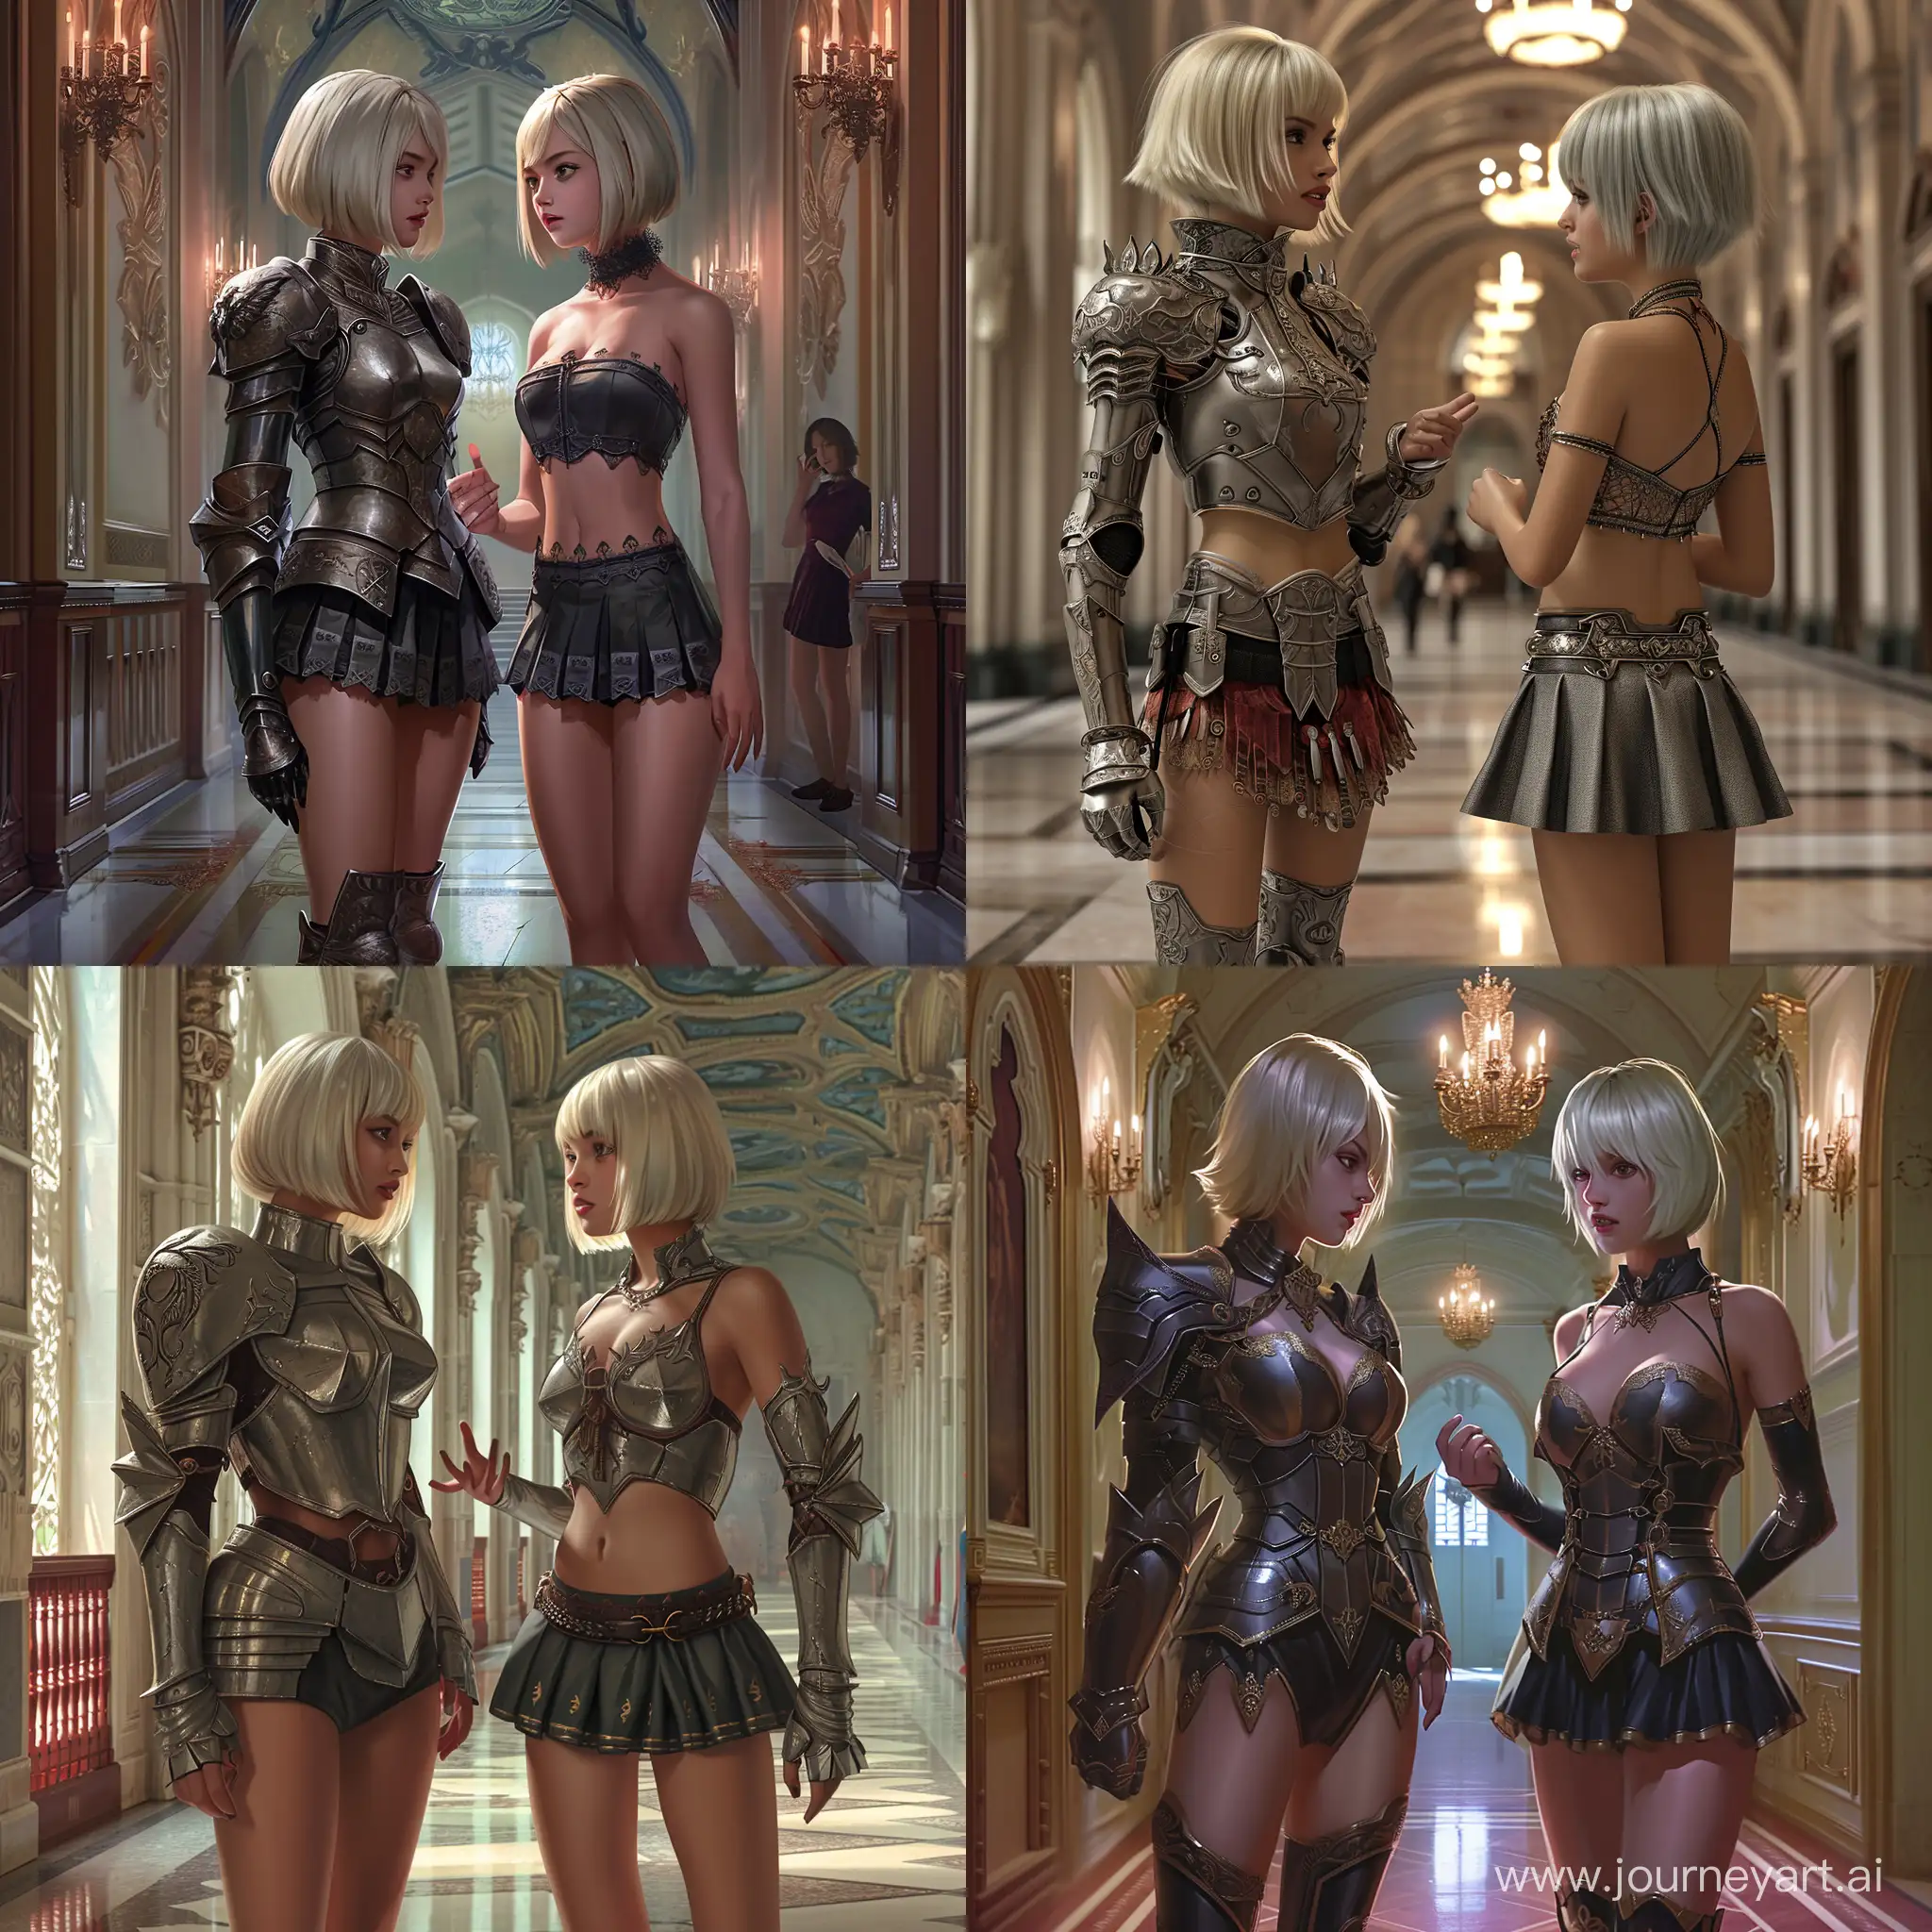 Warrior princess at the palace, blonde hair, blunt chin length hair, regal armor, short skirt, talking to her sister, photorealistic, interior hallway